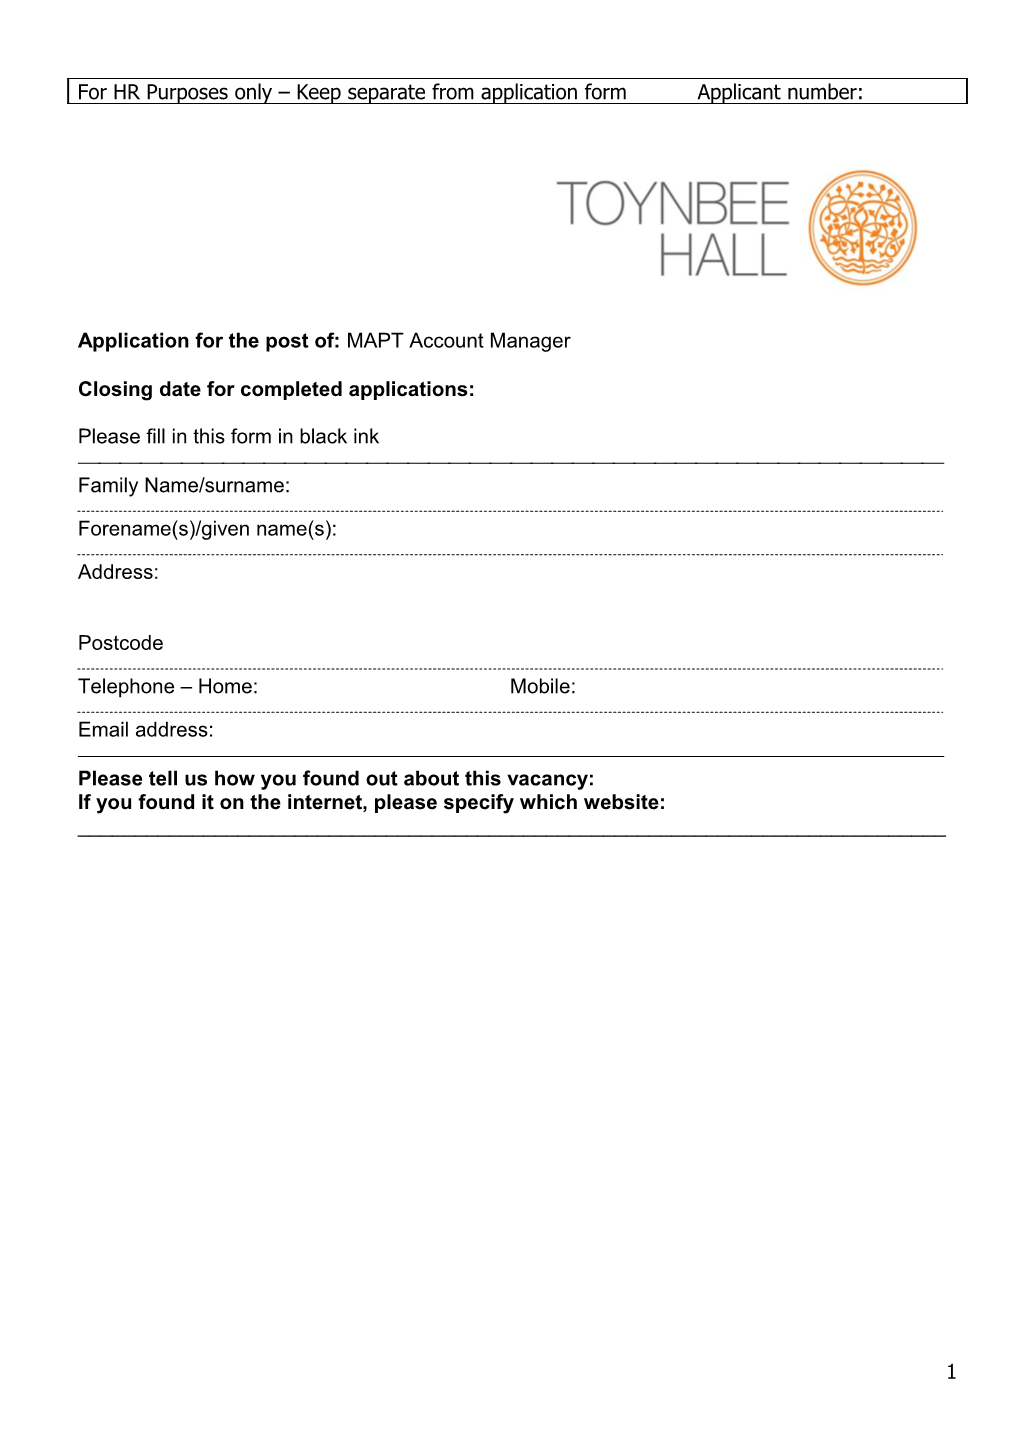 Application for the Post Of:MAPT Account Manager